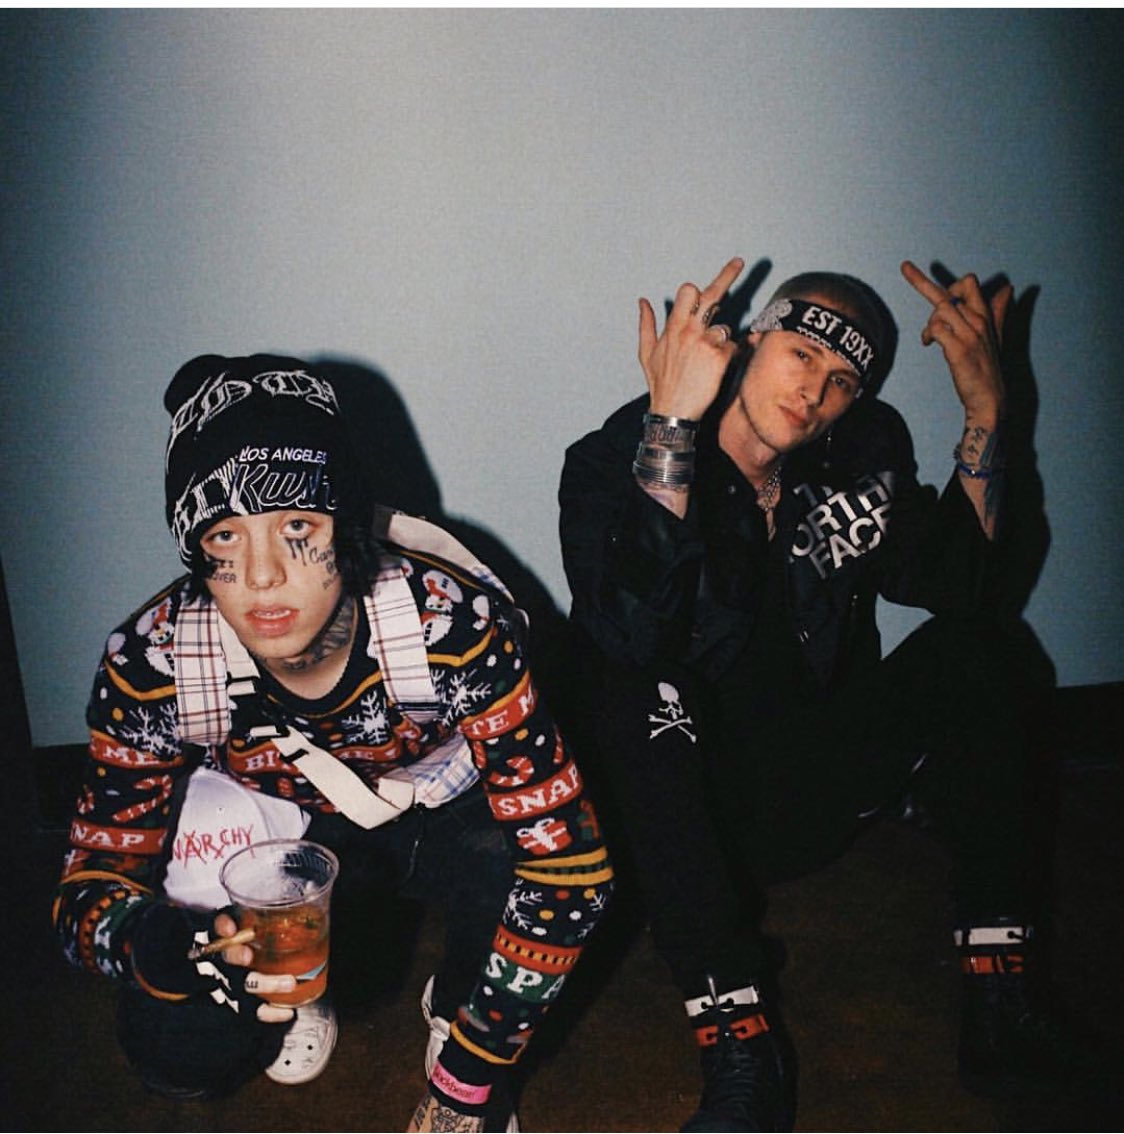 No Jumper On Twitter If Lil Xan And Mgk Did A Song Together What